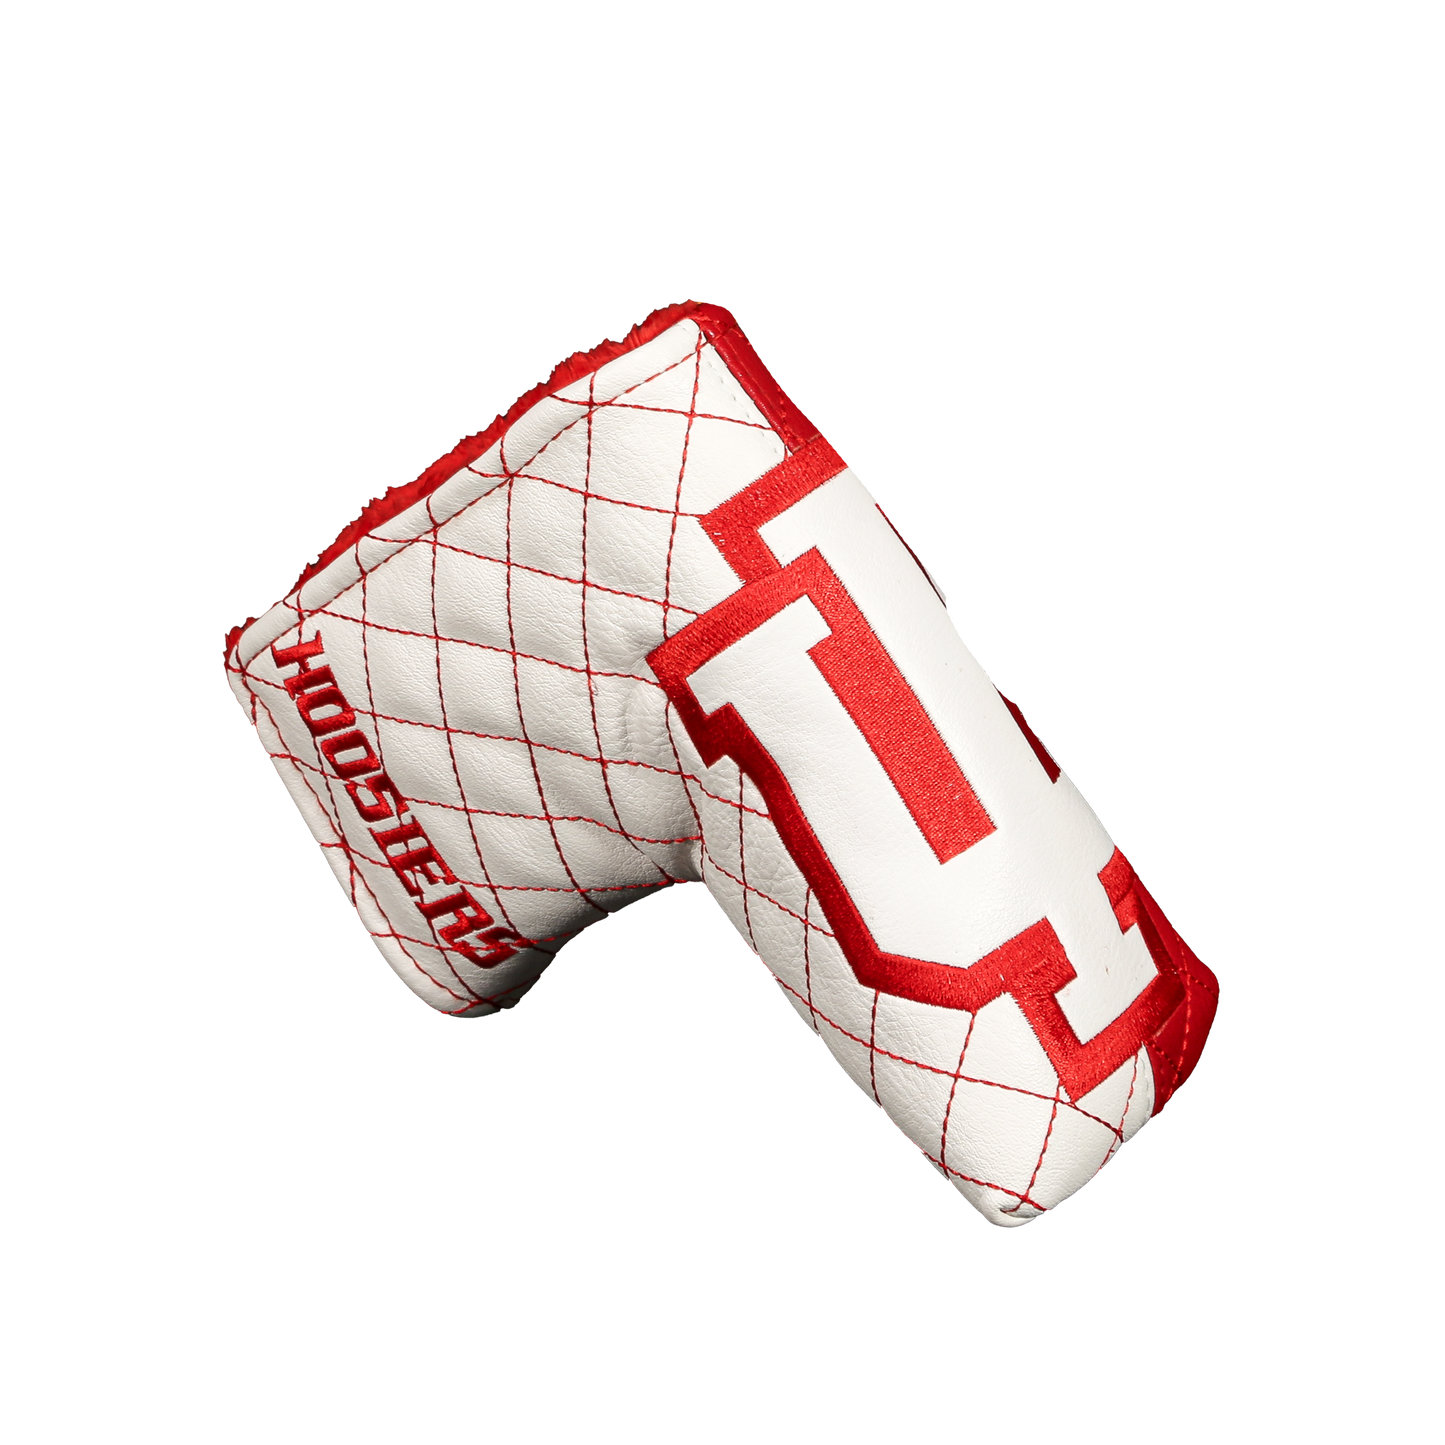 Indiana "Hoosiers" Blade Putter Cover